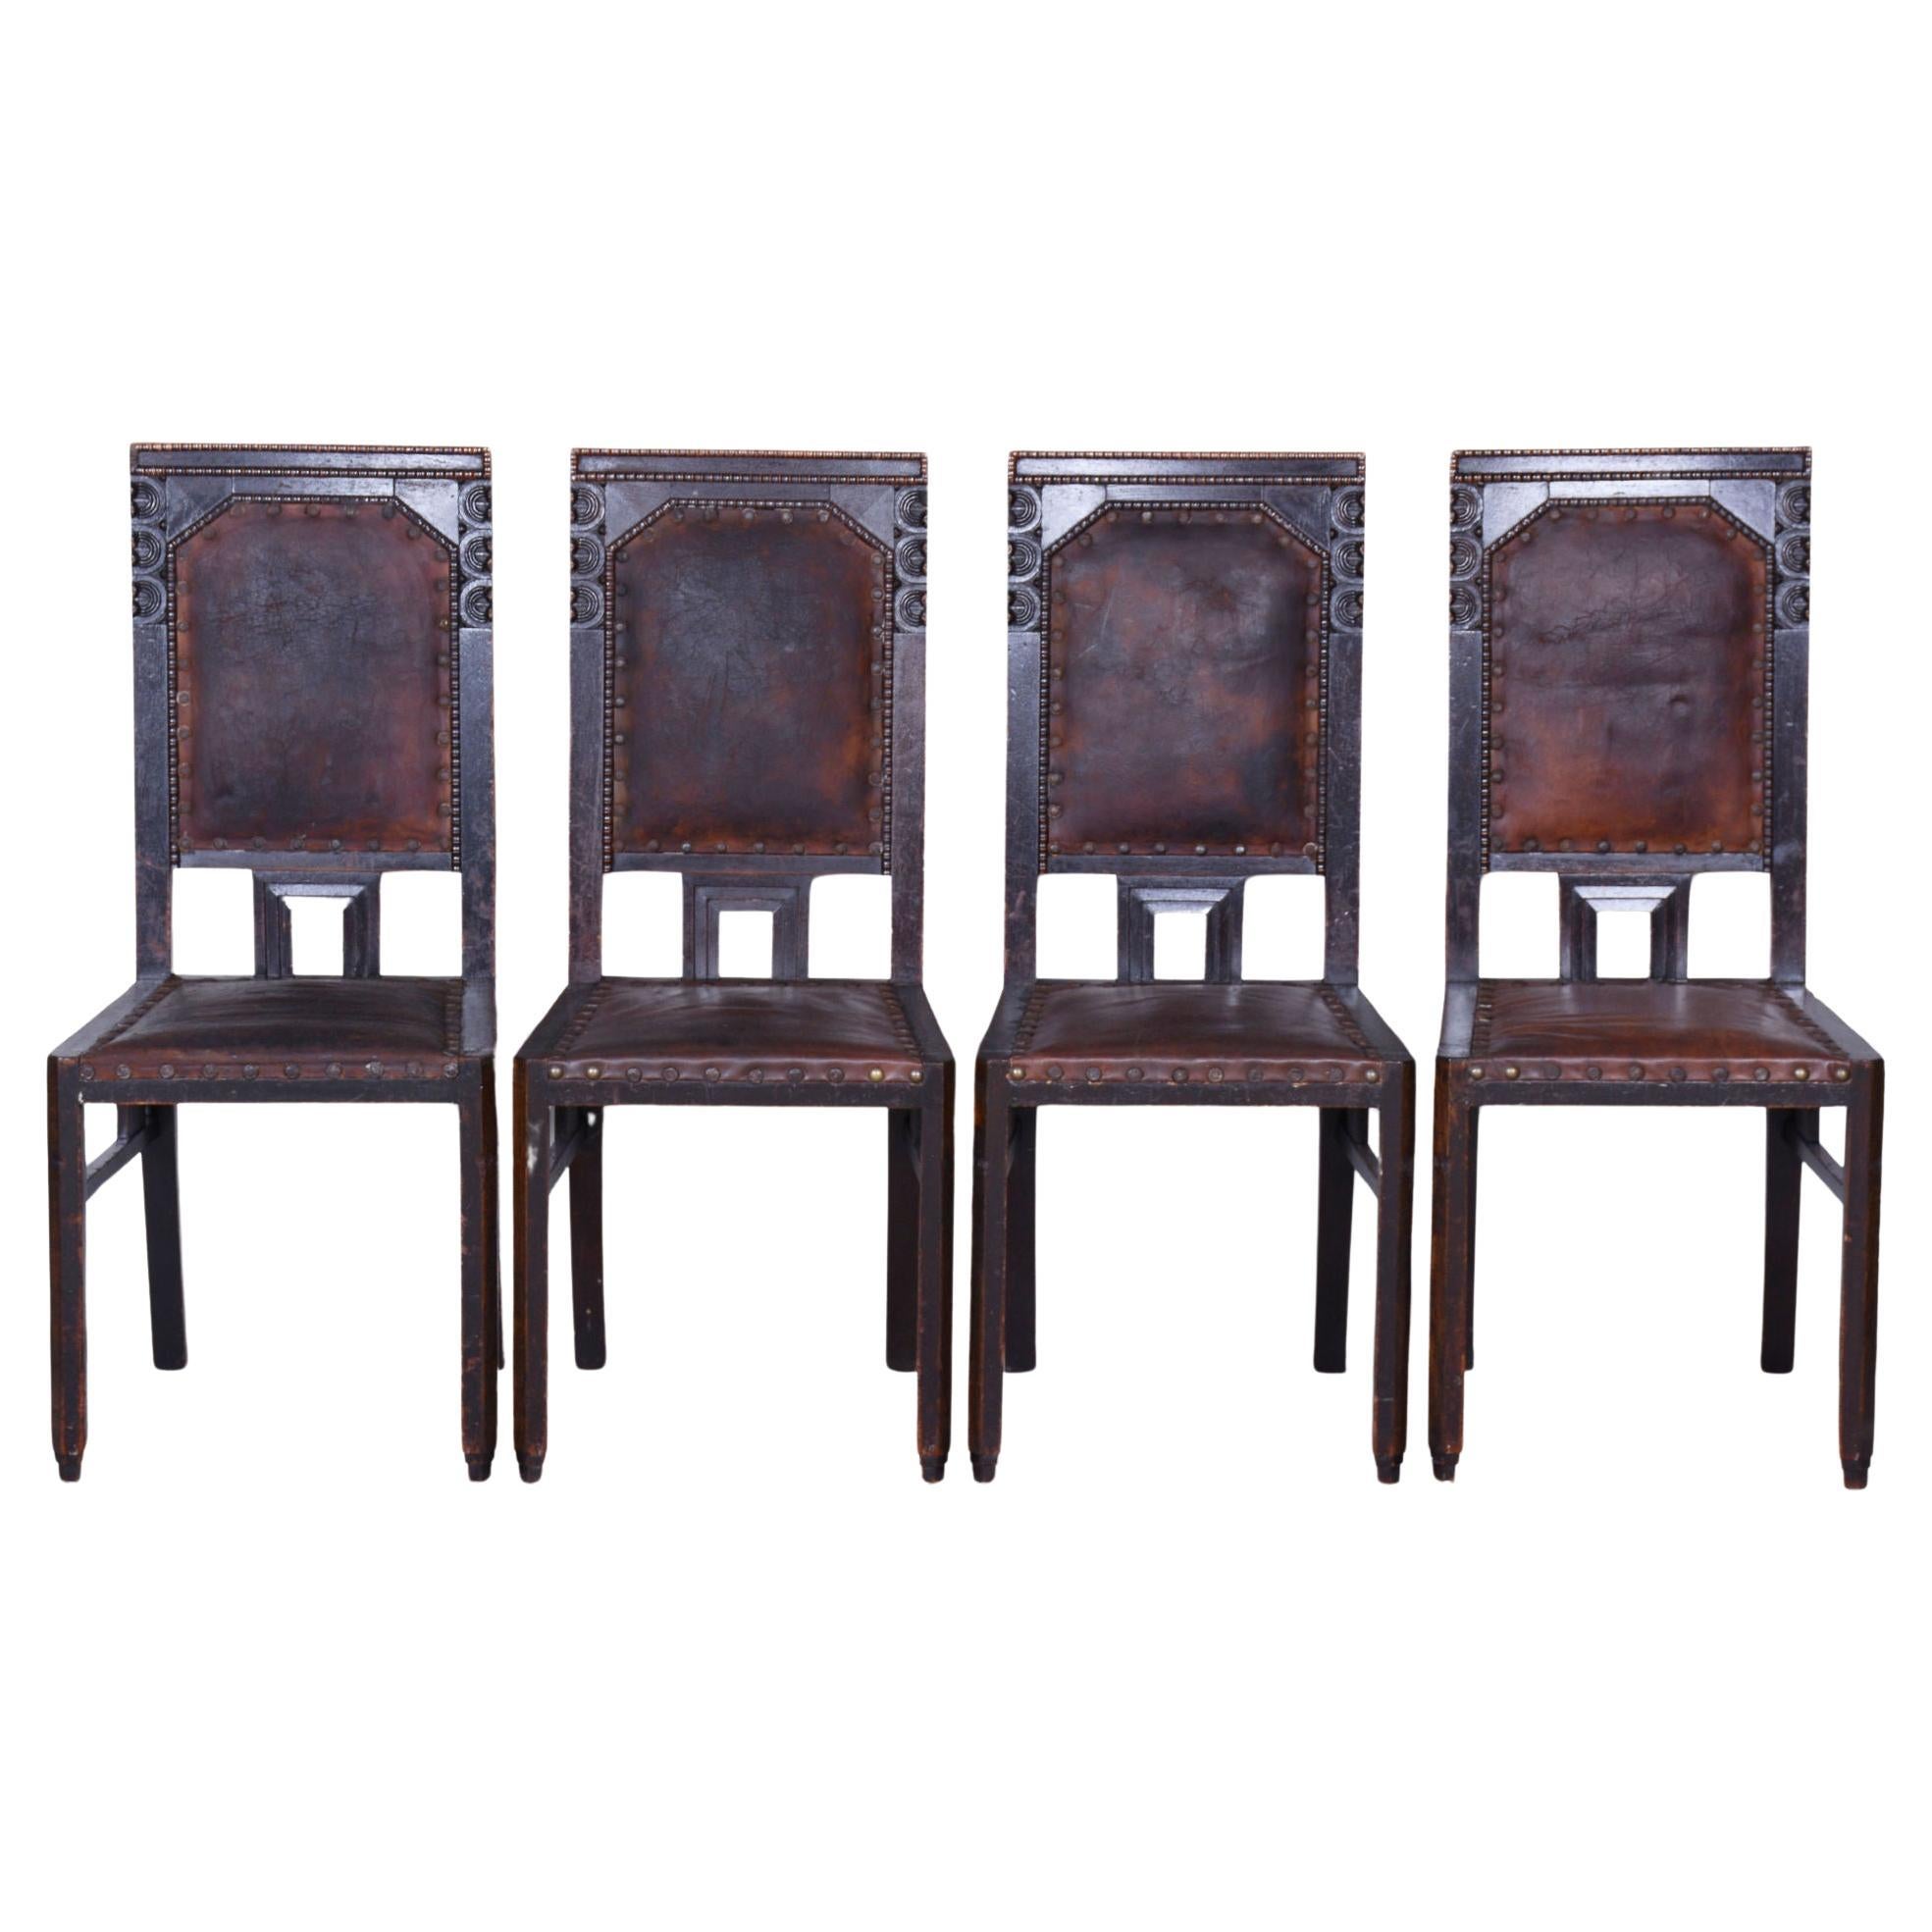 Set of Four Cubist Chairs, by Josef Gočár, Solid Oak, Red Leather, Czech, 1910s For Sale